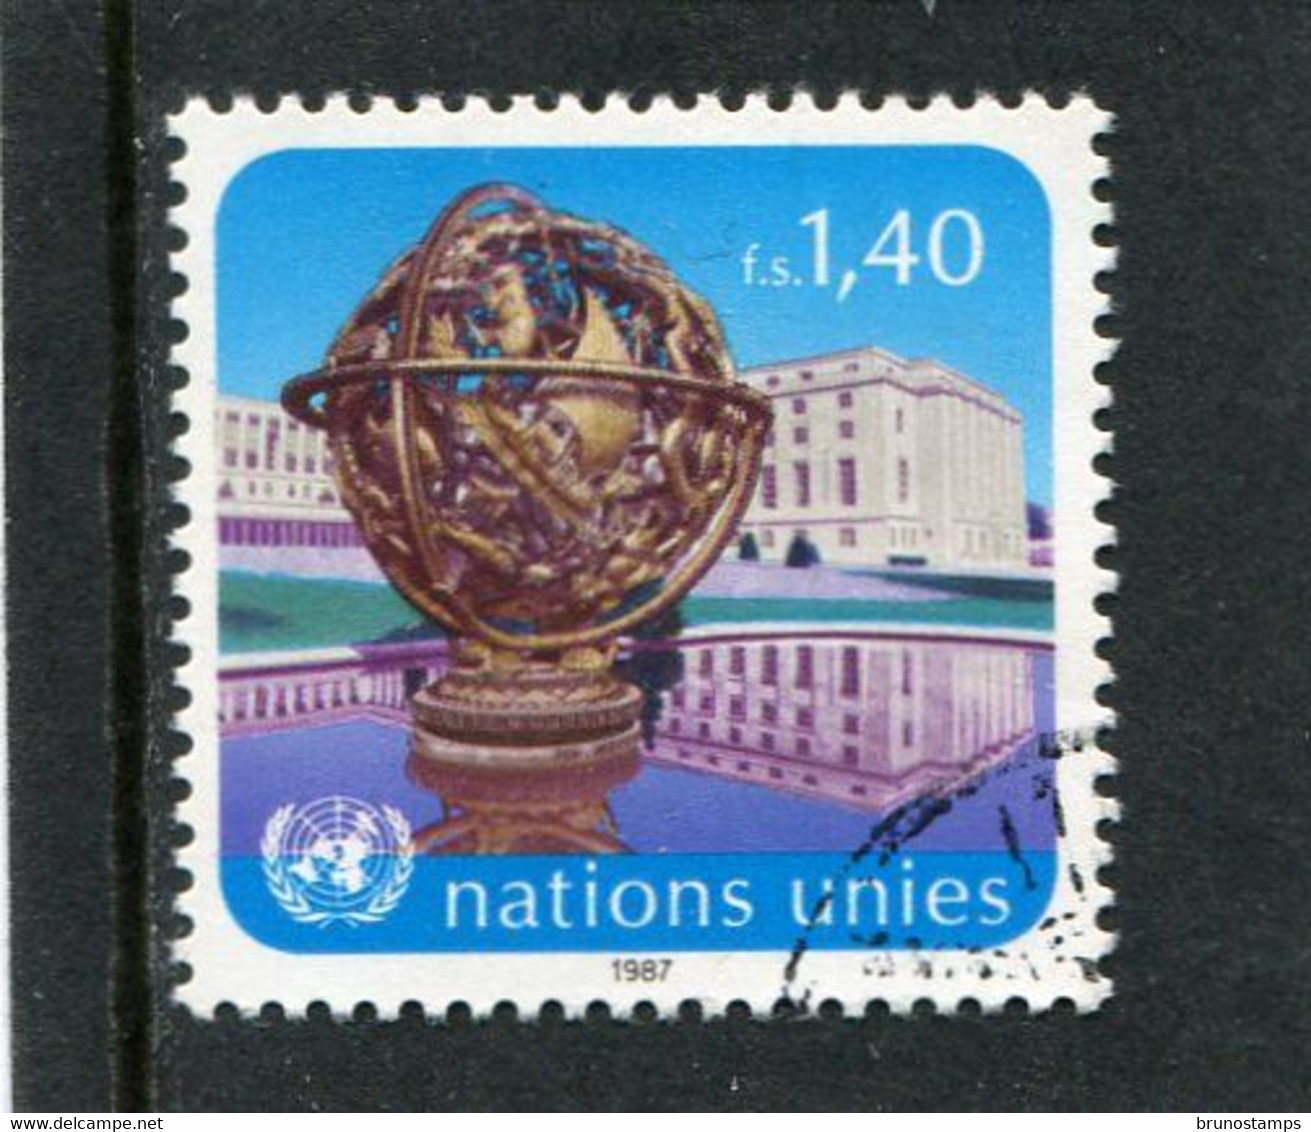 UNITED NATIONS - GENEVE  -  1987  1.40 F.  DEFINITIVE  FINE USED - Used Stamps